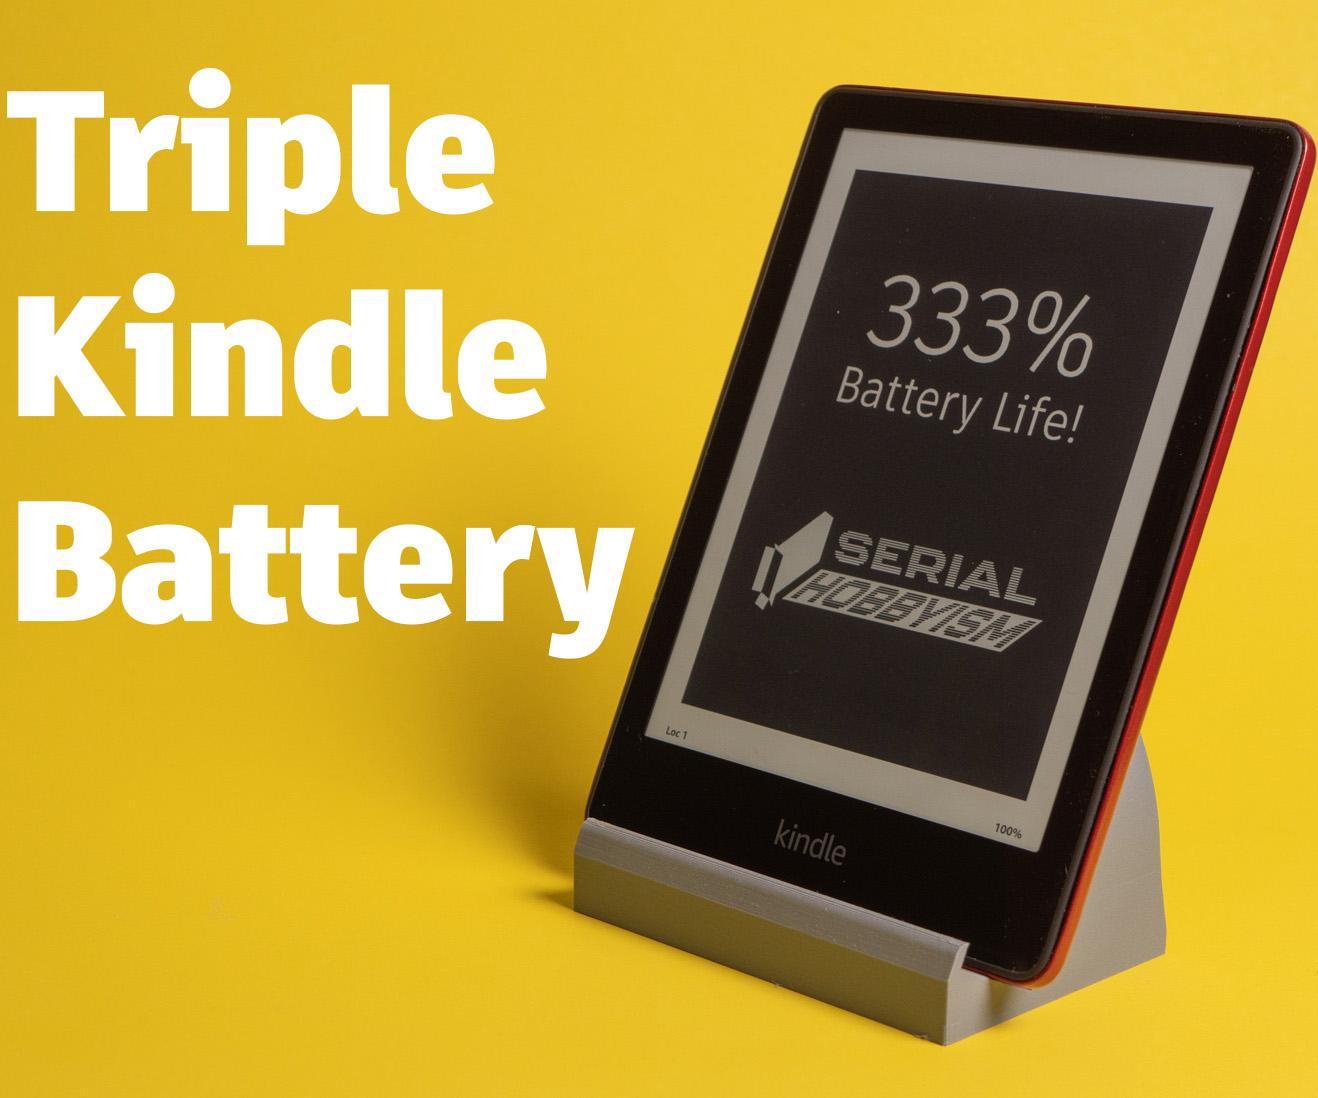 Triple the Battery Life of Kindle Paperwhite!